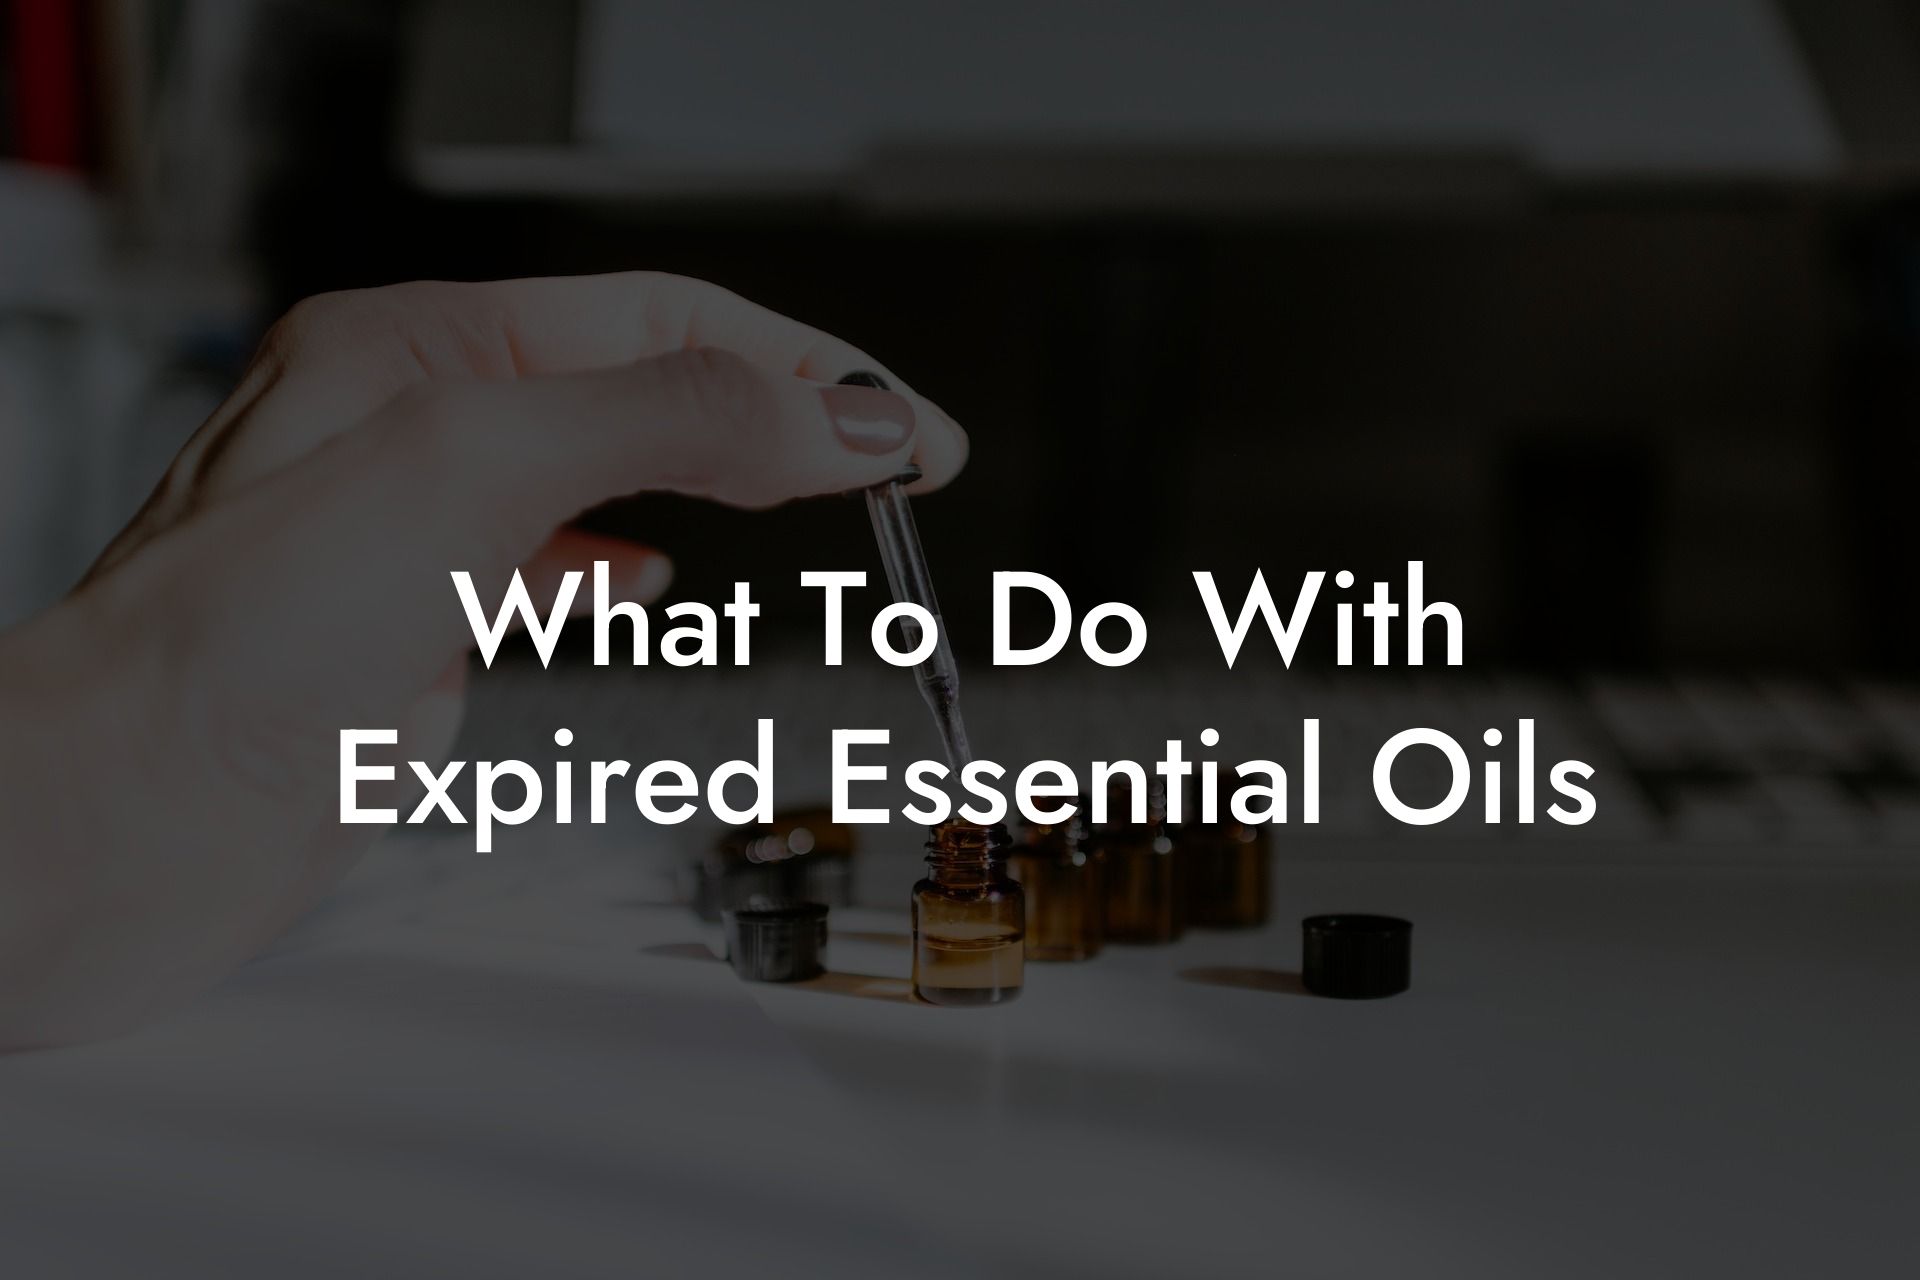 What To Do With Expired Essential Oils